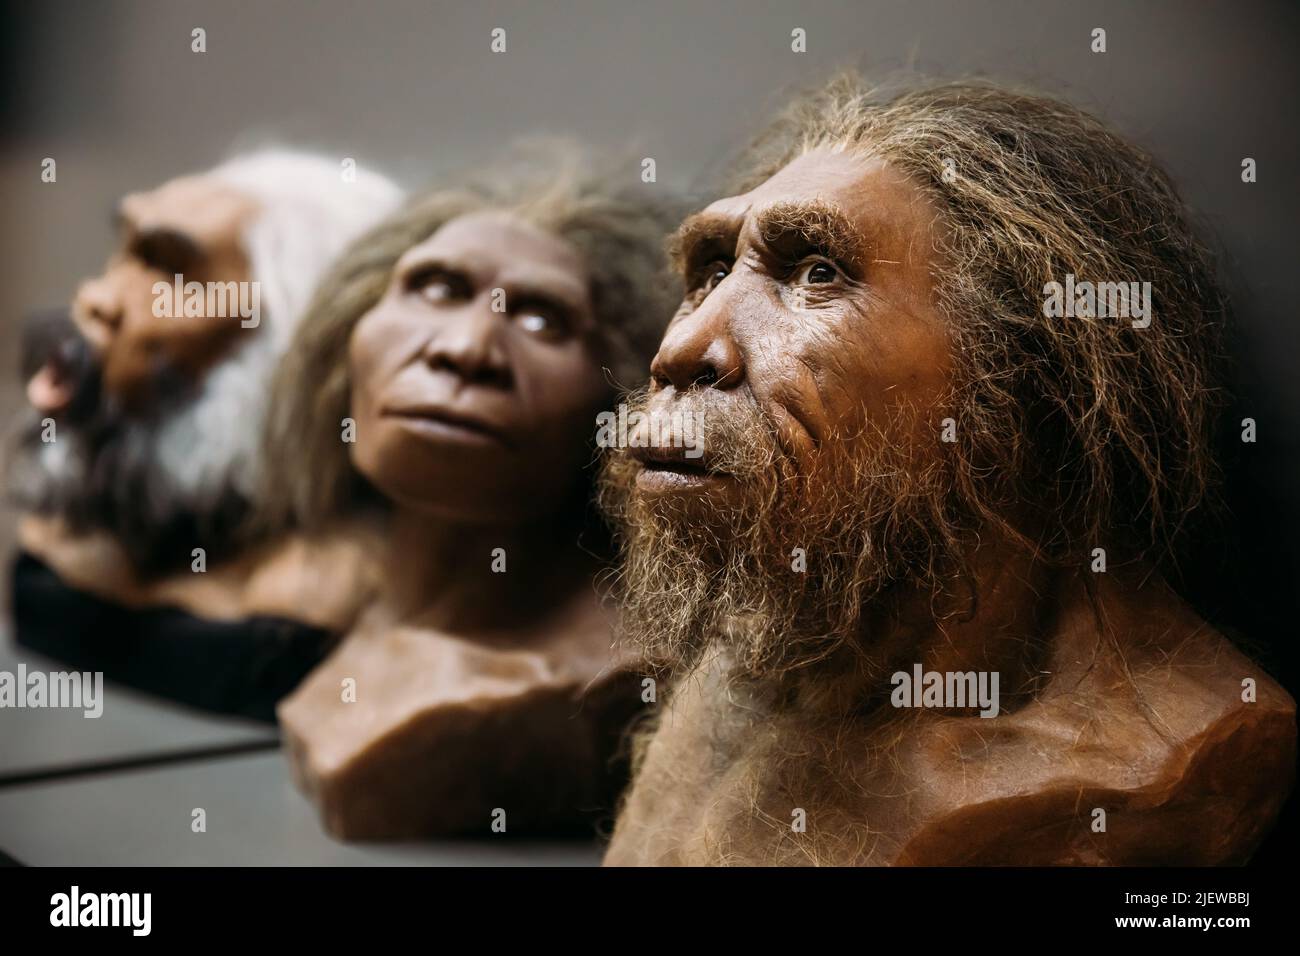 Reconstruction Of Appearance Homo Neanderthalensis At Museum Exhibition. Demonstrating Prehistoric Ancestors Homo Neanderthalensis. Homo Sapiens Neand Stock Photo